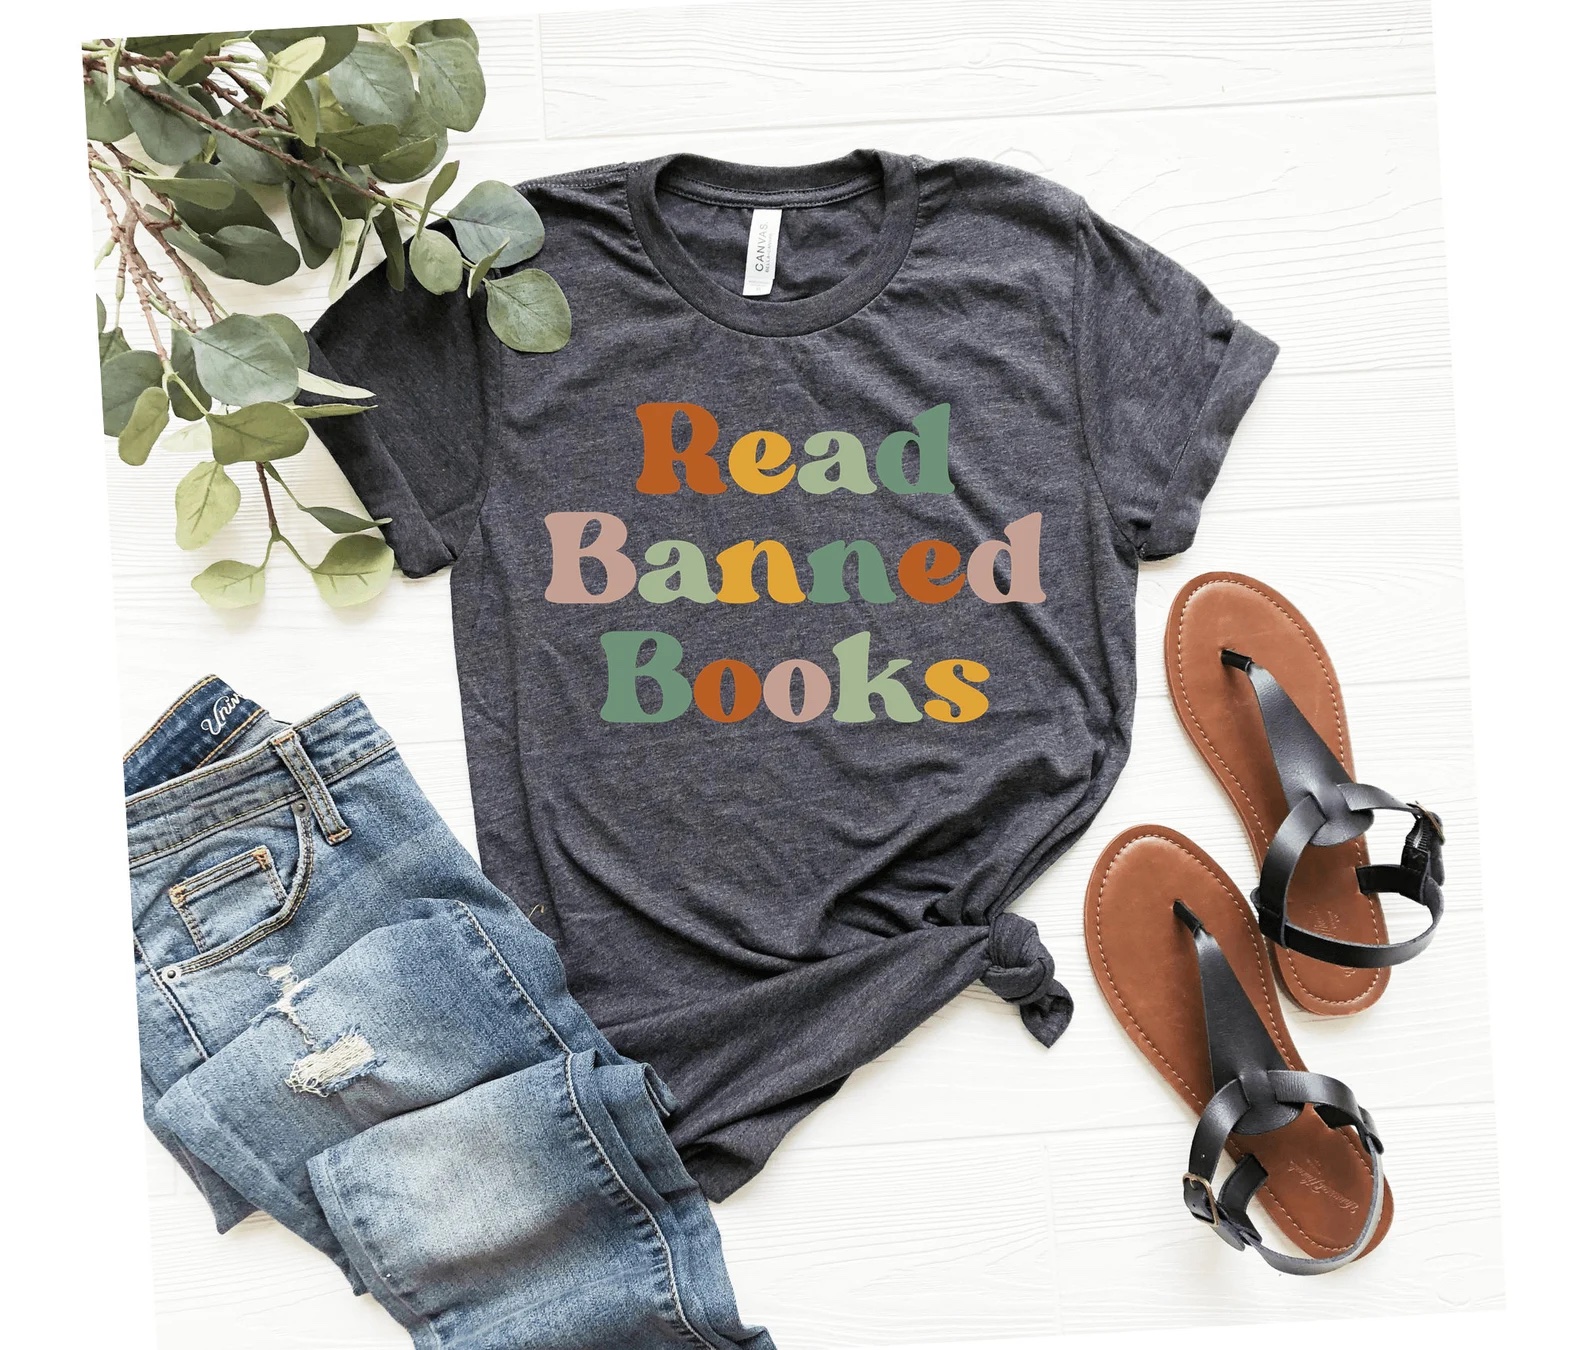 A photo of a grey t-shirt that reads, "Read Banned Books"